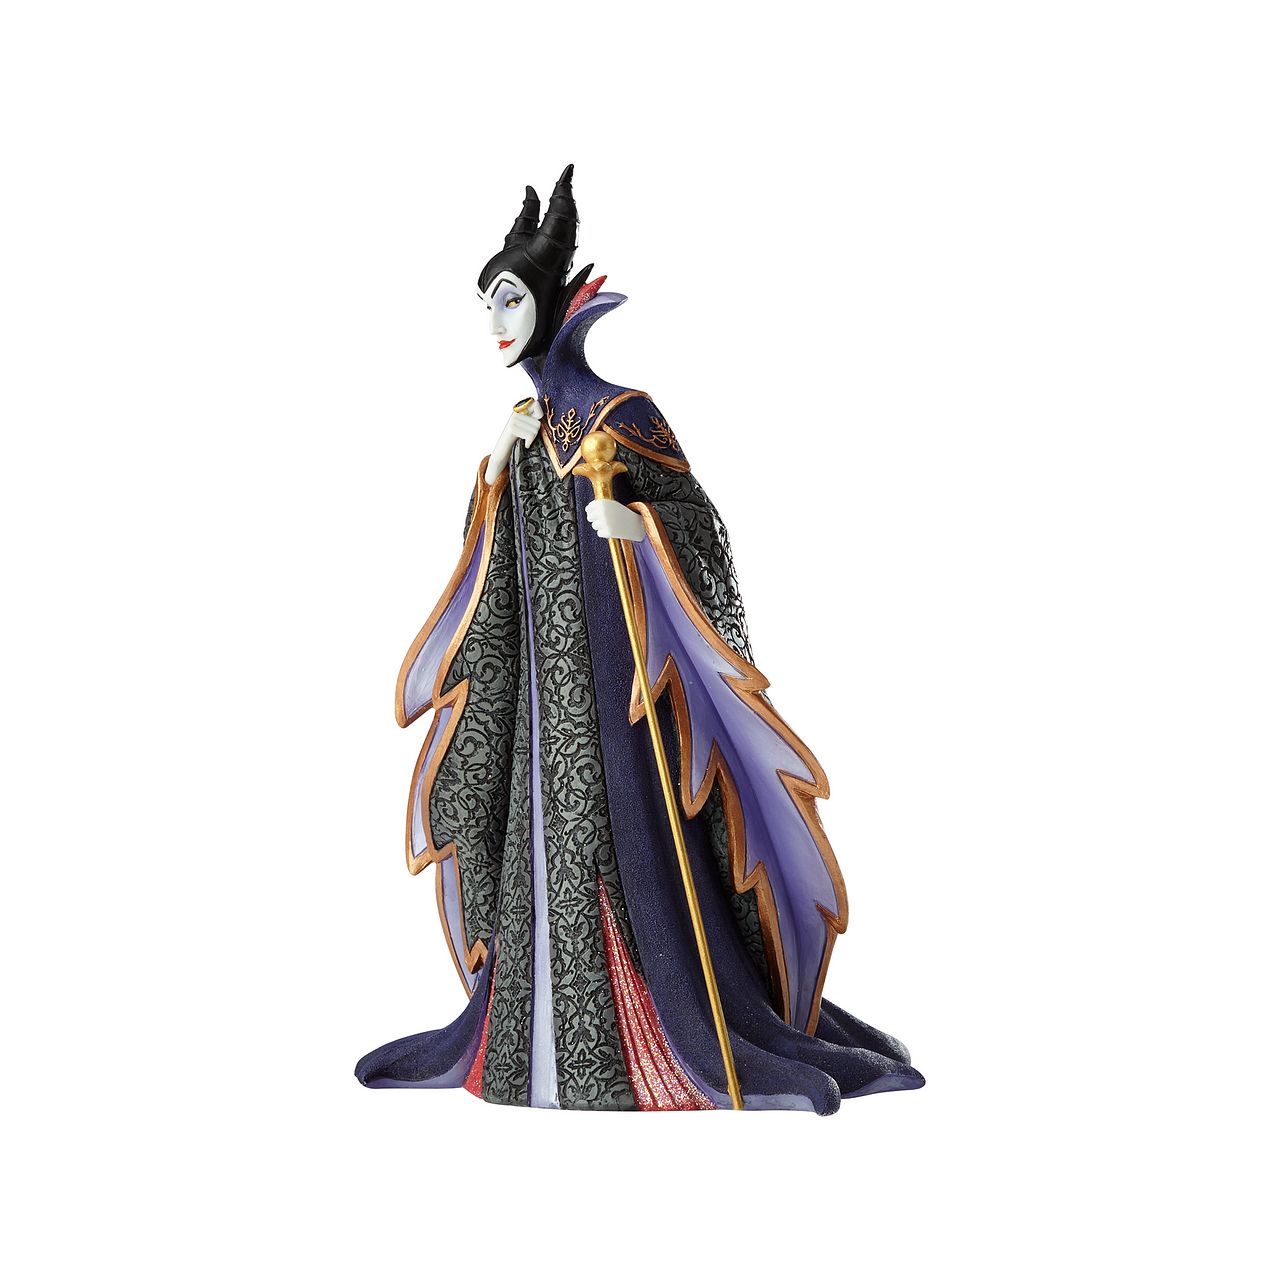 Disney Maleficent Figurine  Maleficent strikes a regal pose in this handcrafted design from the Haute Couture collection, her ominous onyx robes reimagined as a satin gown and feathered, floor-length cape. Ready to rule the runway, the fashionable figure holds a golden scepter.